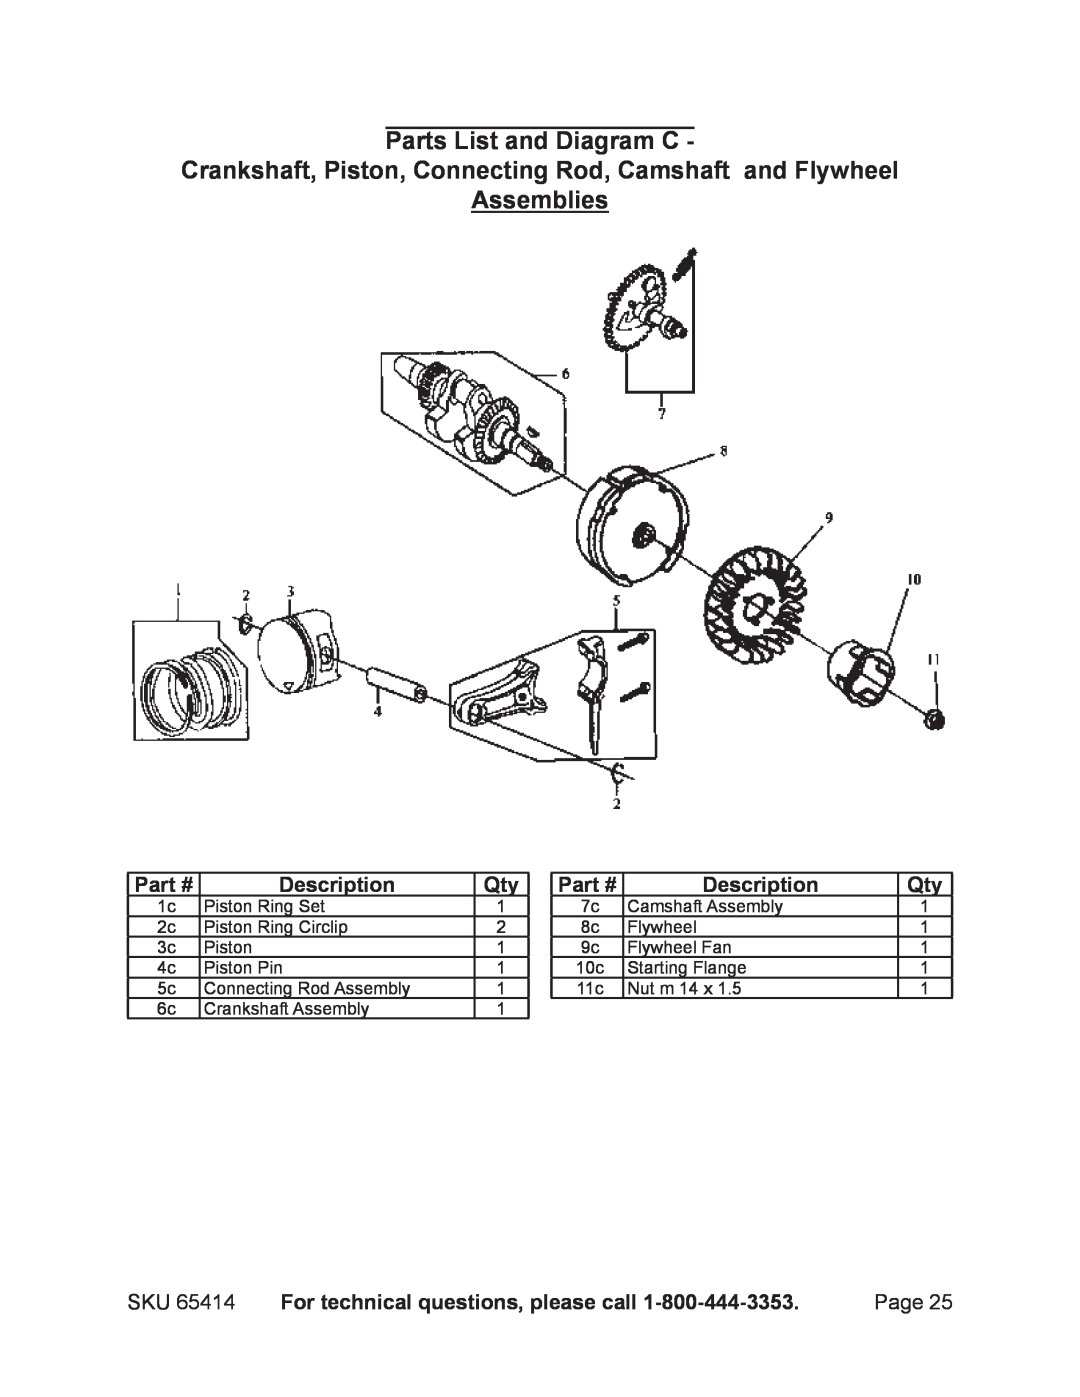 Chicago Electric 65414 Parts List and Diagram C, Crankshaft, Piston, Connecting Rod, Camshaft and Flywheel Assemblies 